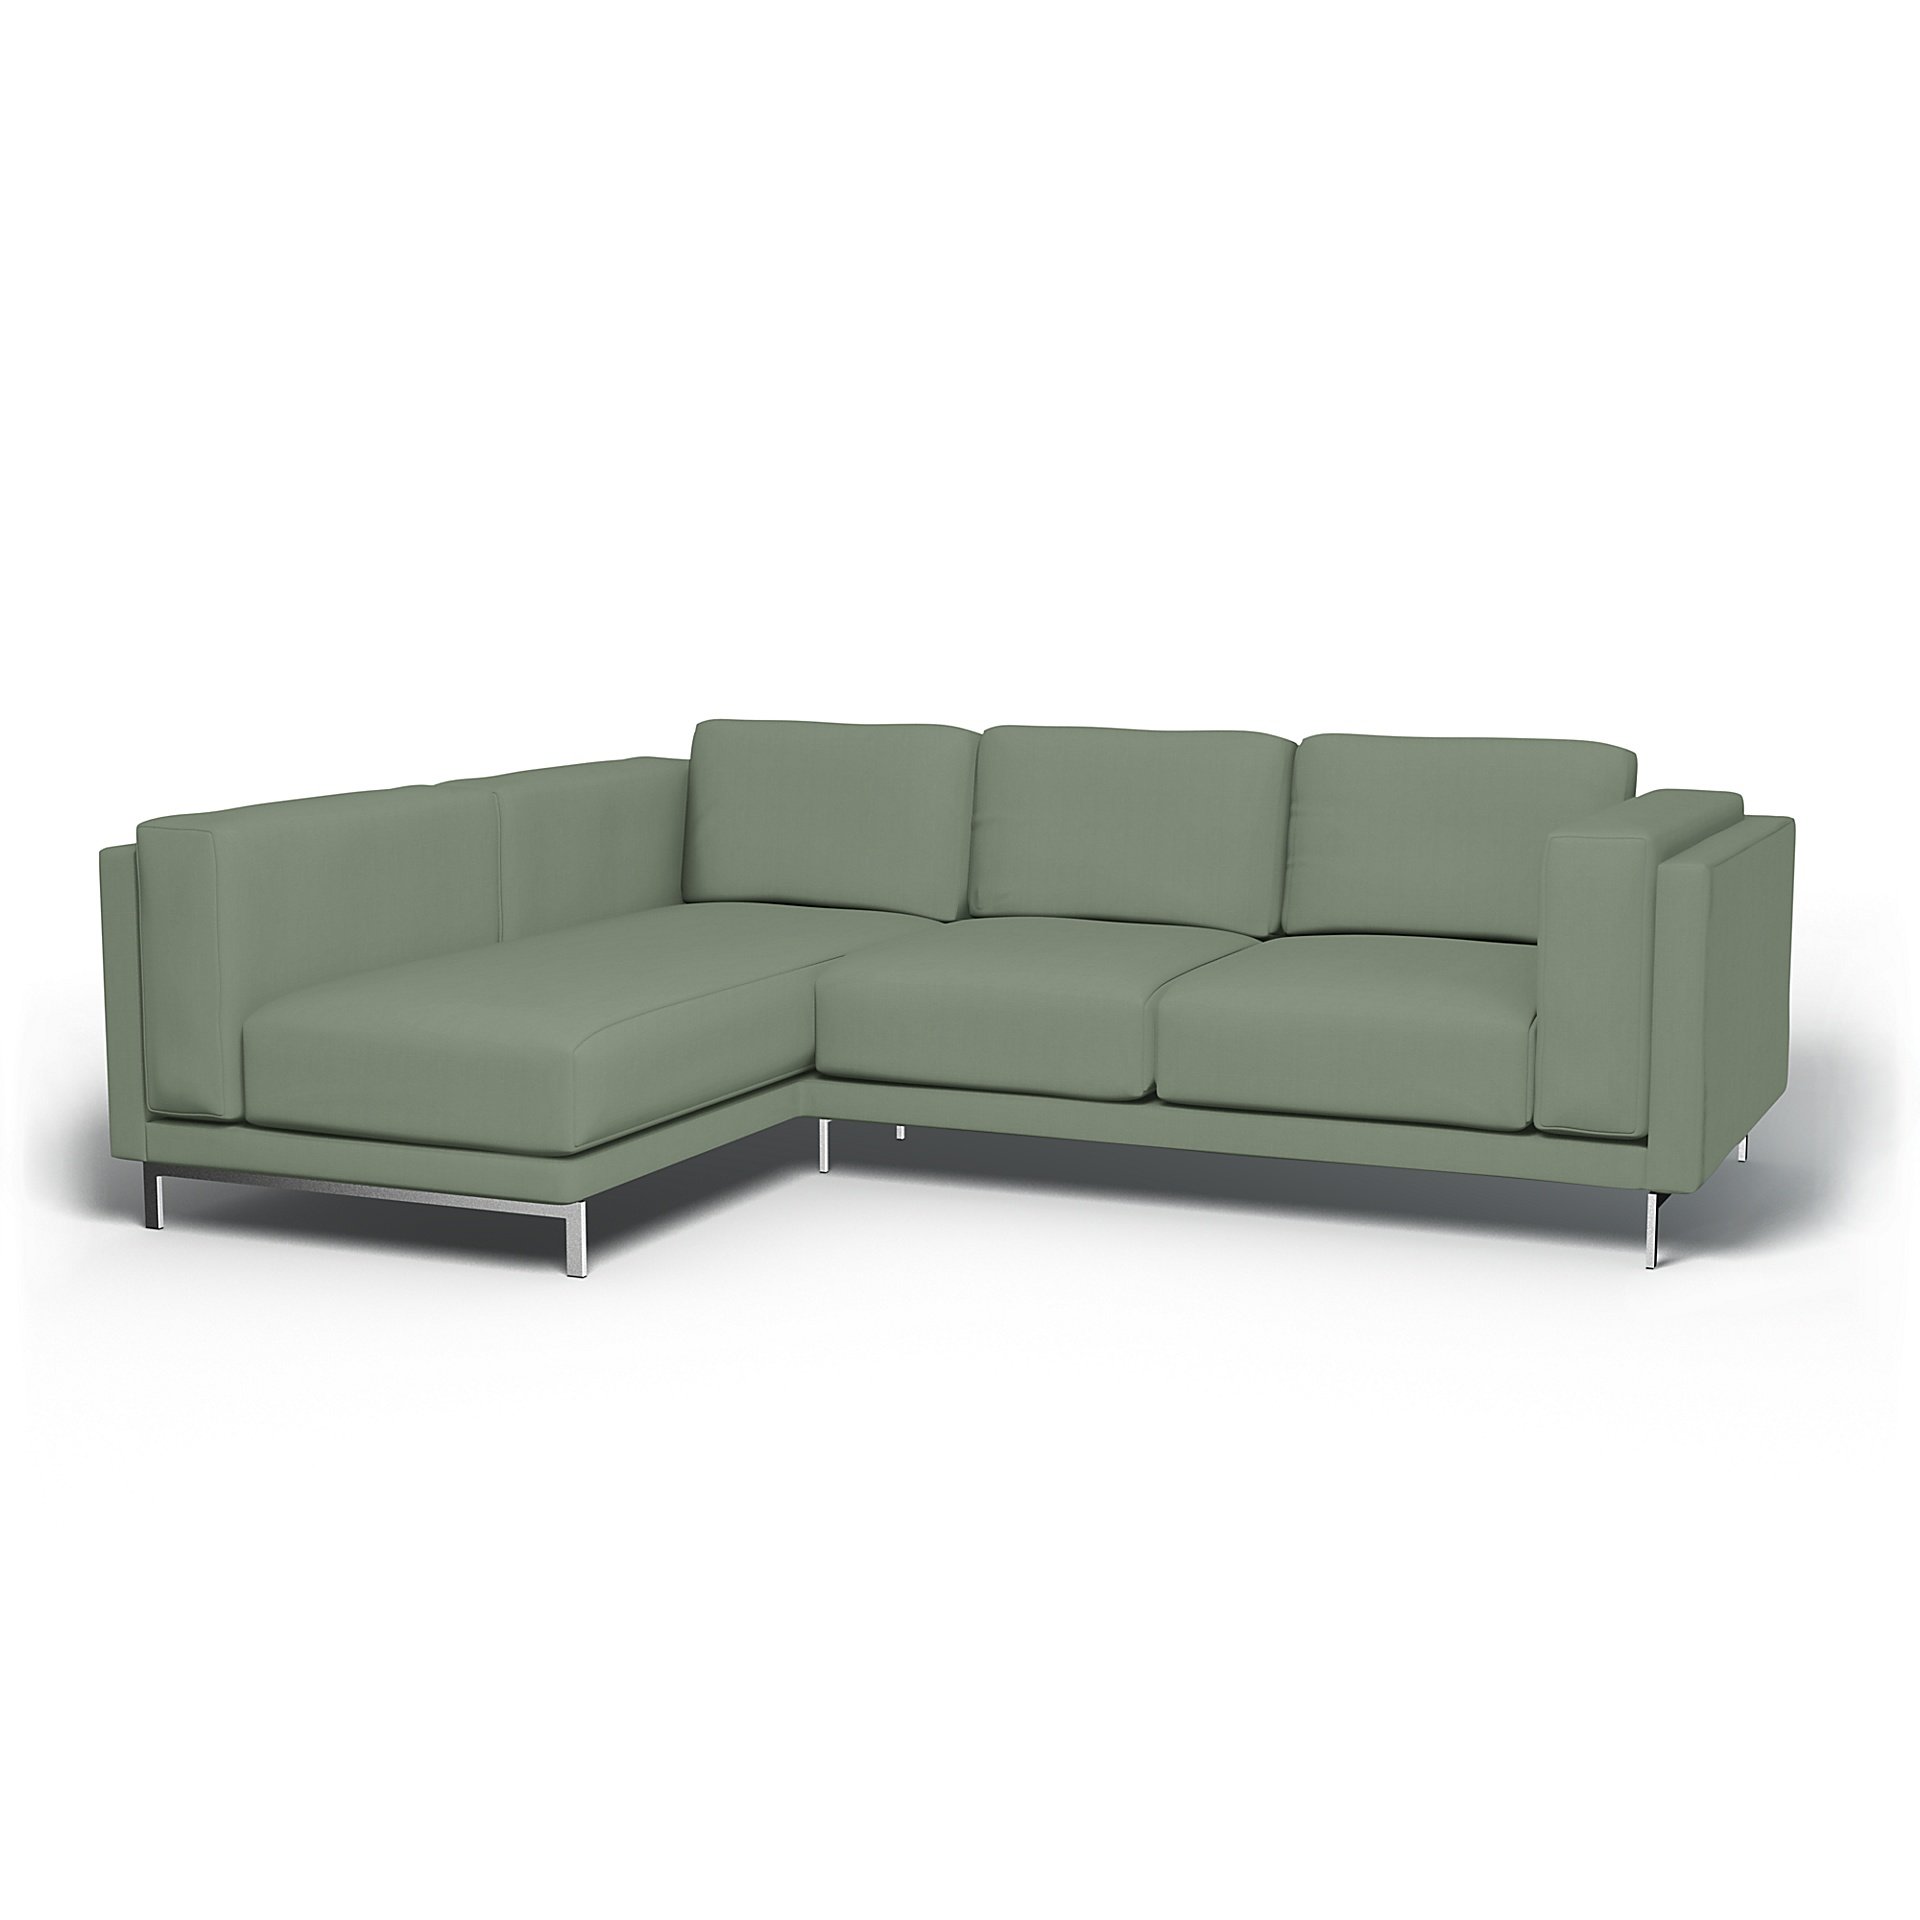 IKEA - Nockeby 3 Seater Sofa with Left Chaise Cover, Seagrass, Cotton - Bemz